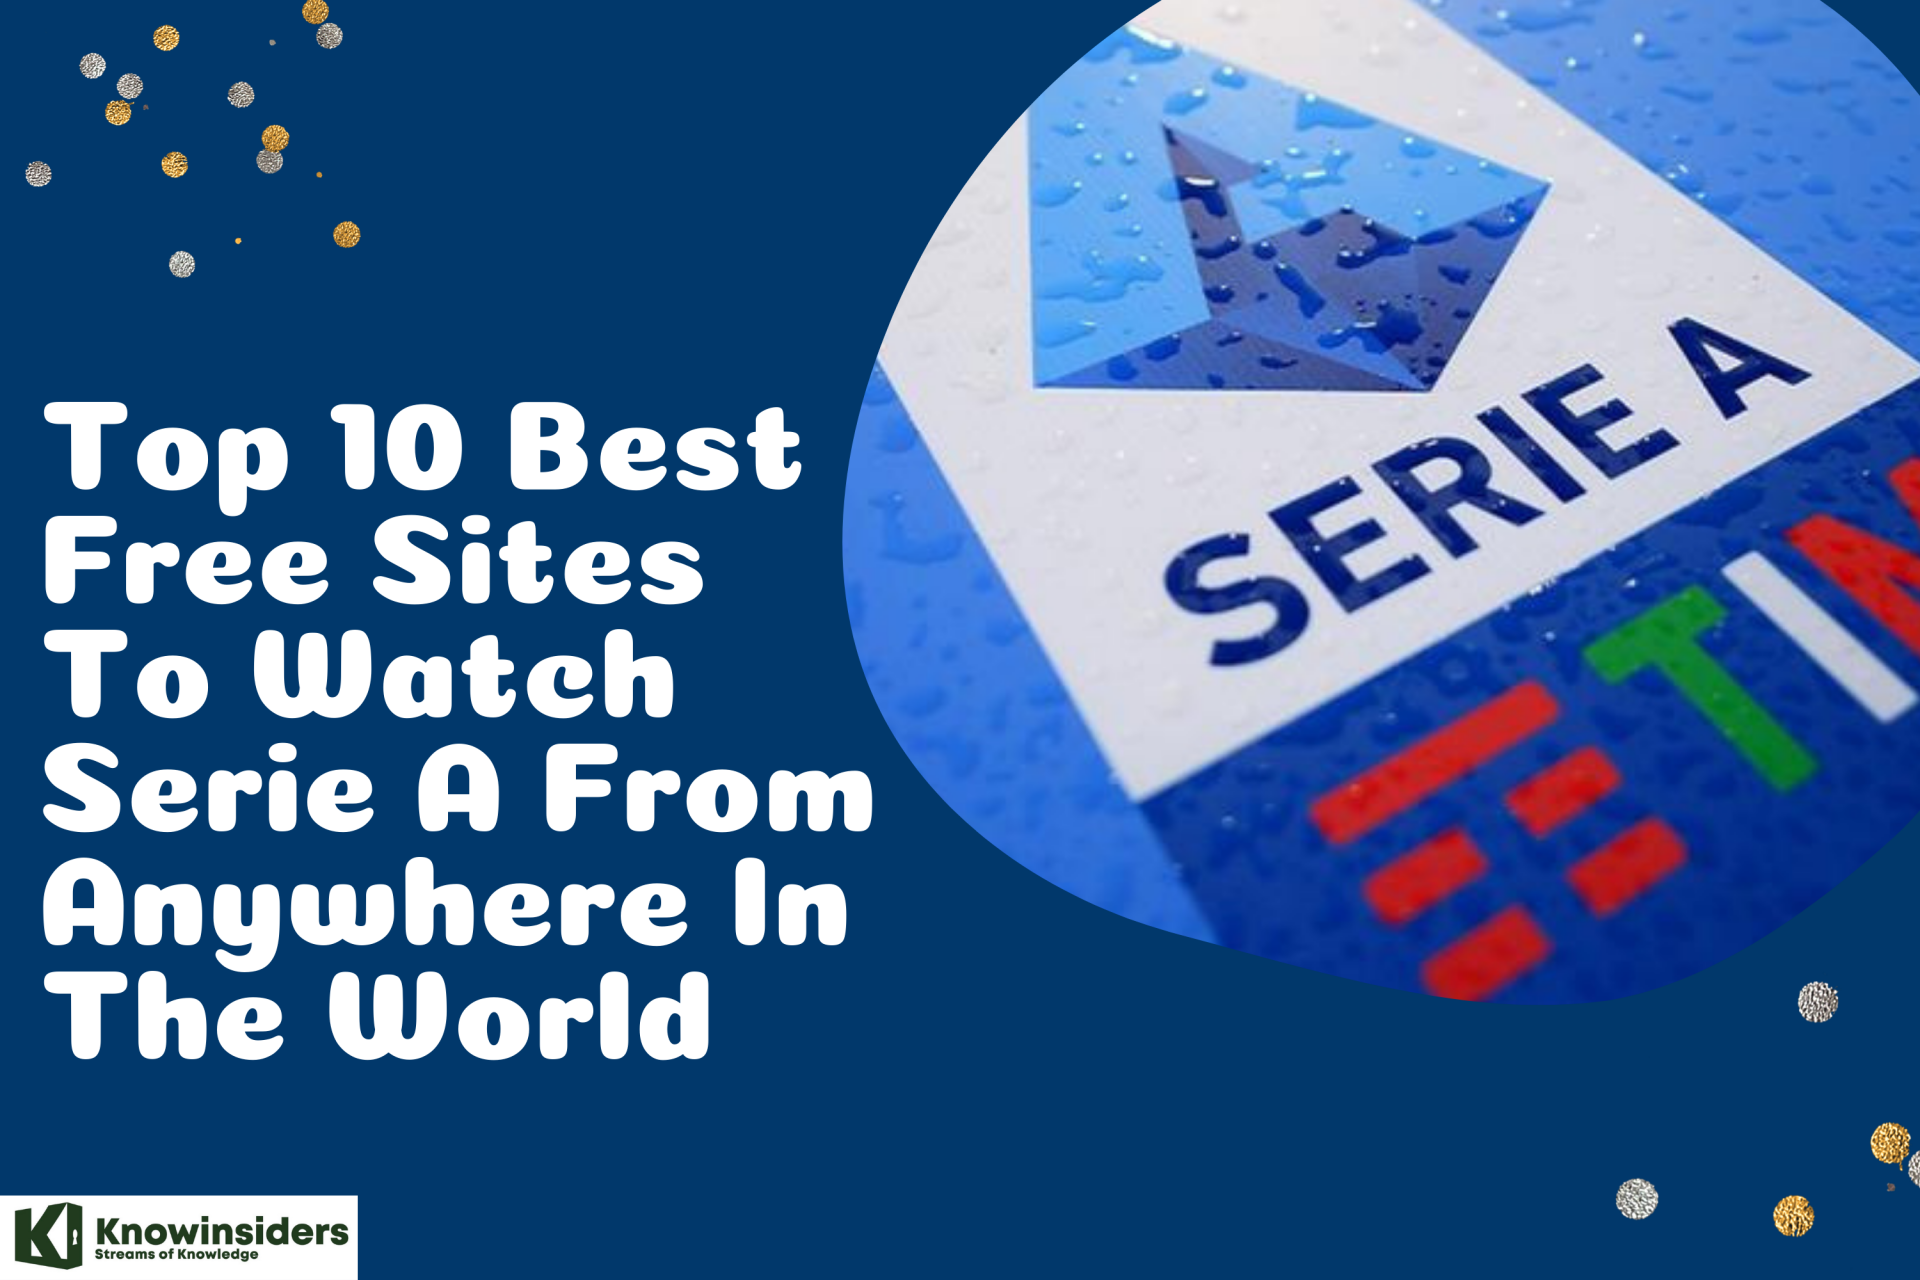 Top 10 Best Free Sites To Watch Serie A From Anywhere In The World